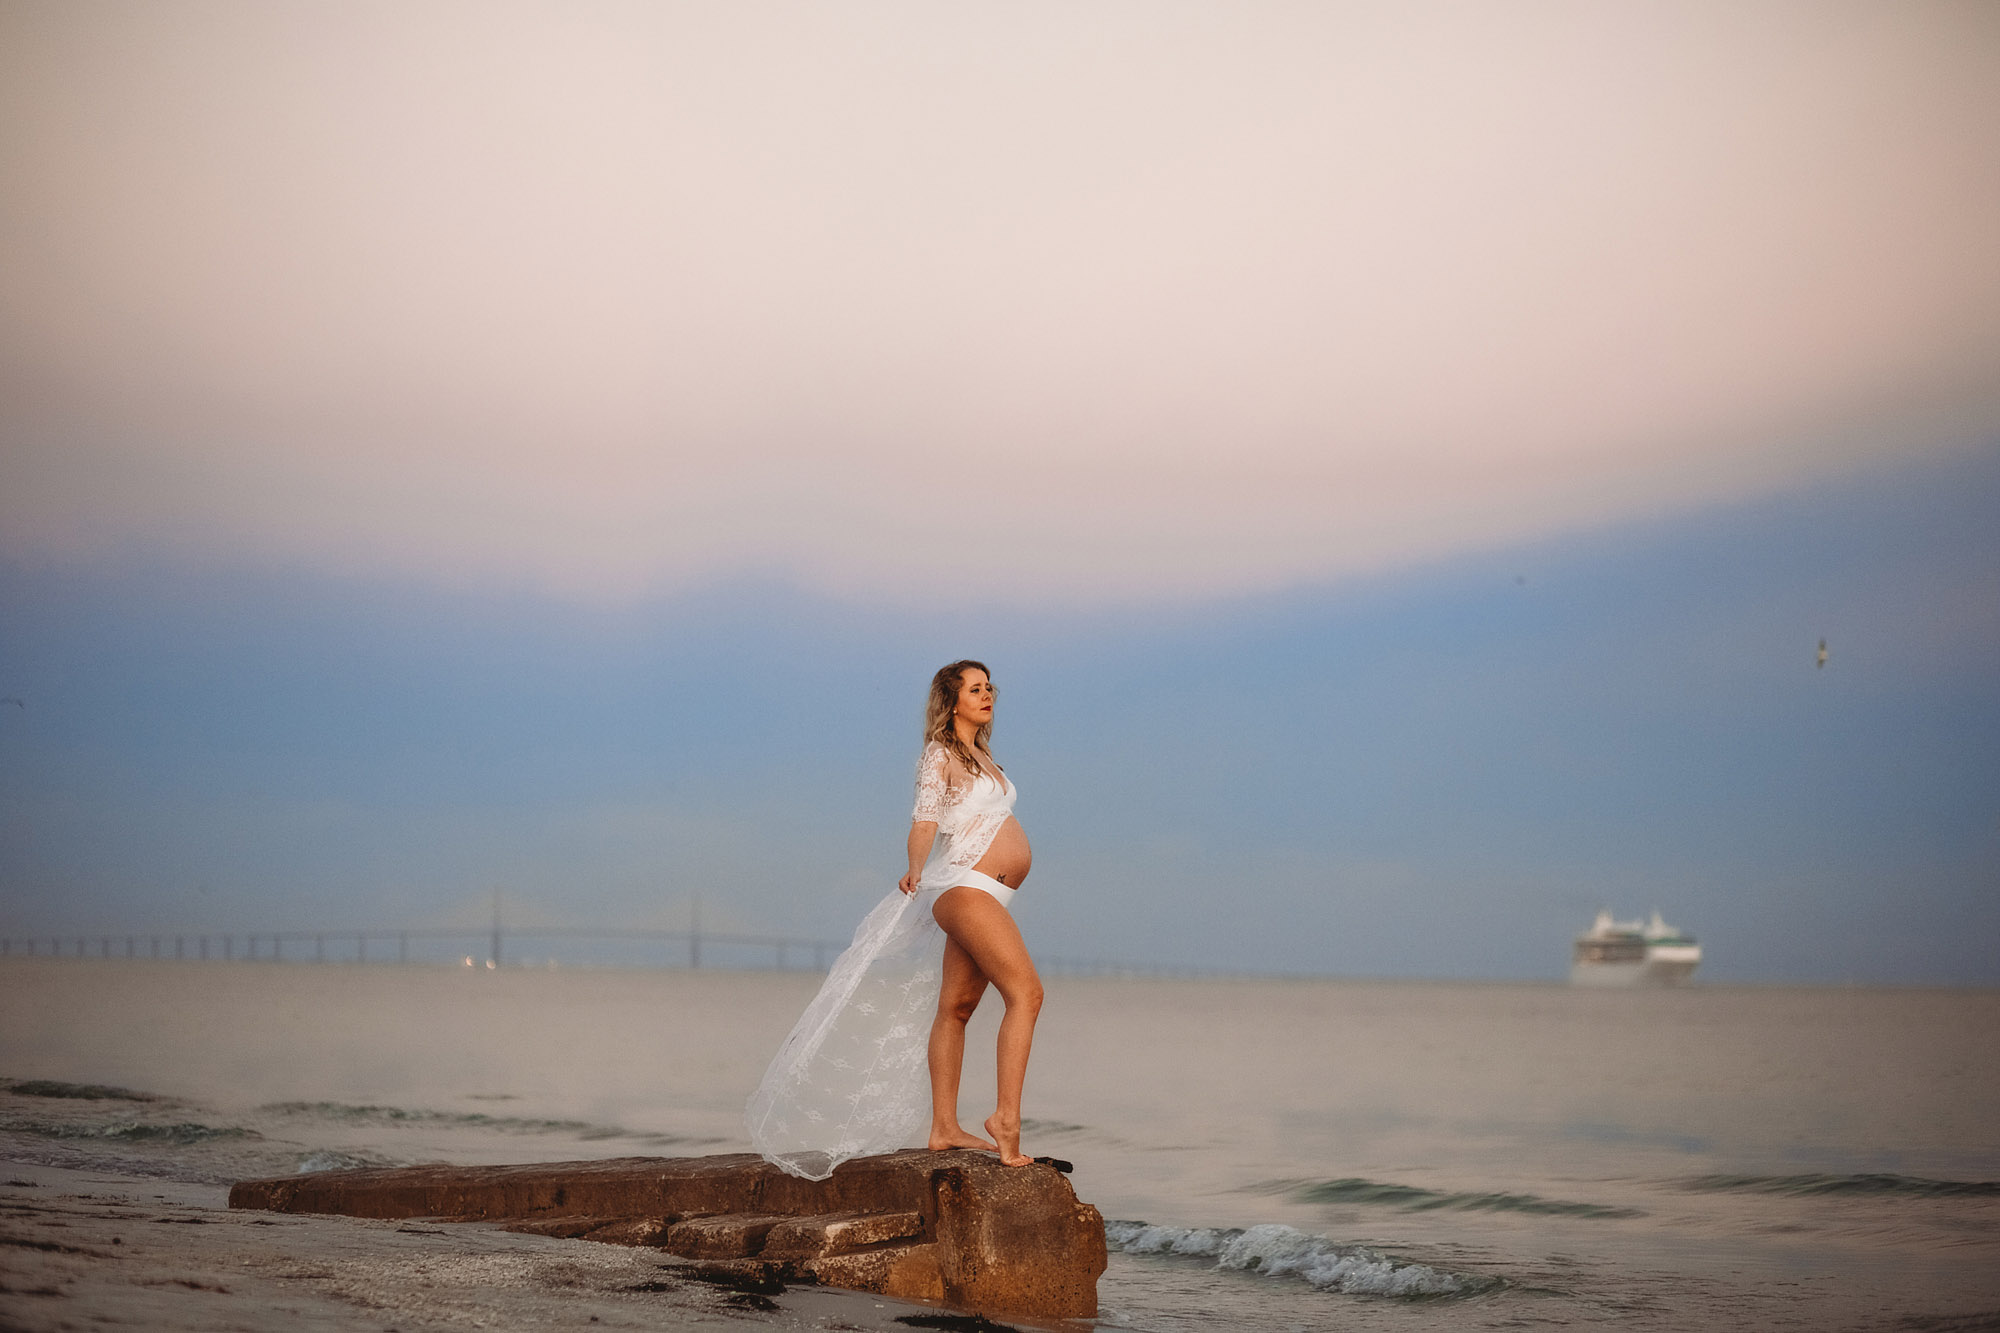 sunset beach maternity pictures, maternity photography at the beach 